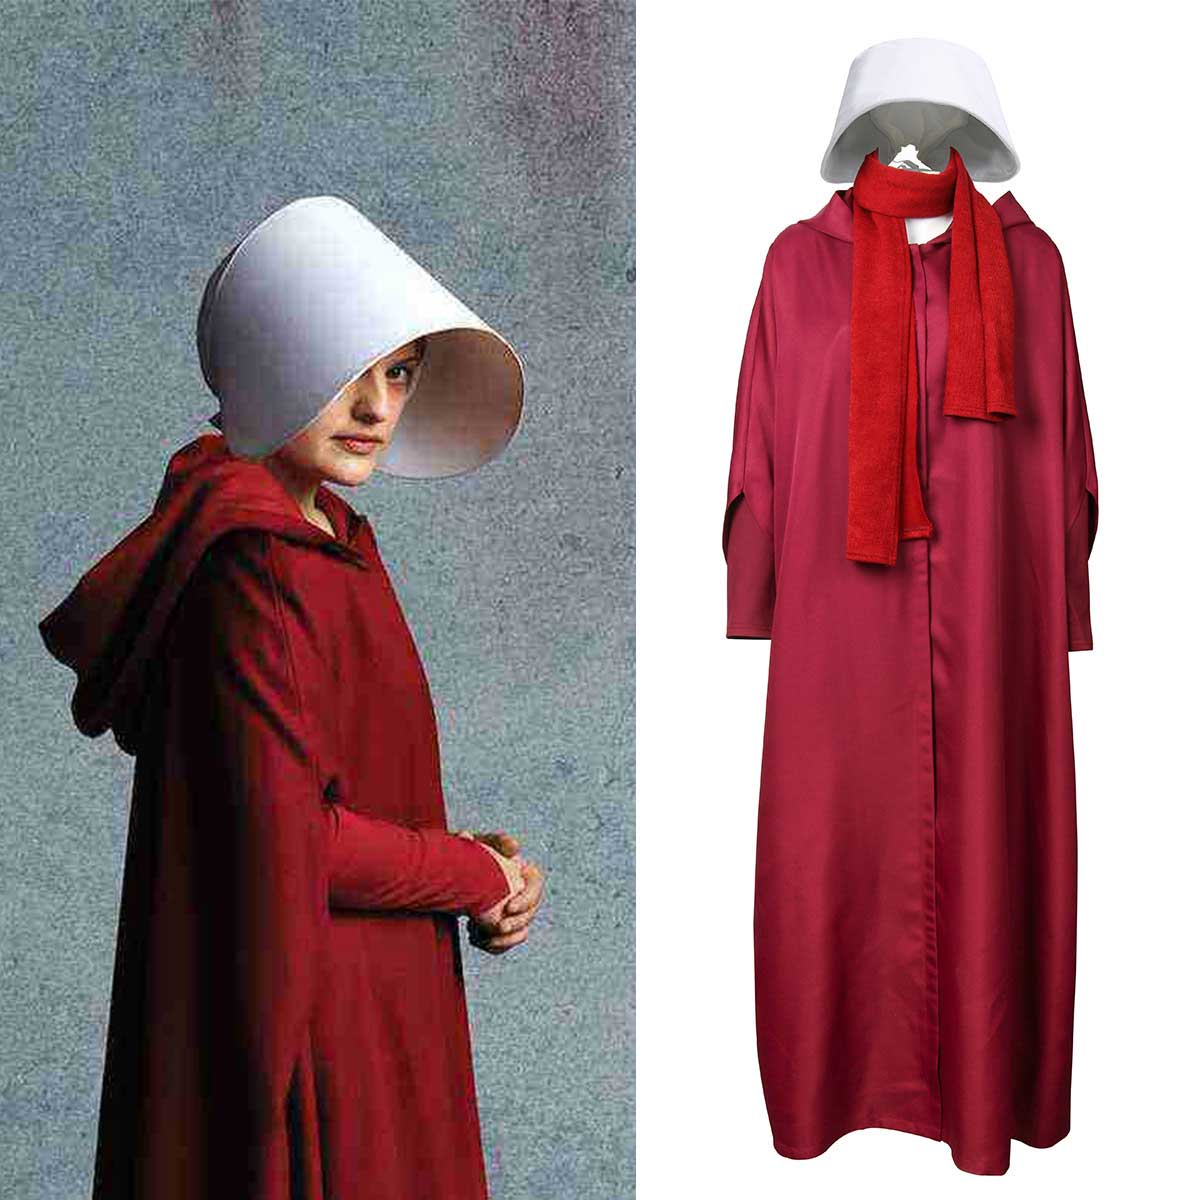 The Handmaid's Tale June Osborne Red Cape Costume For Halloween Party